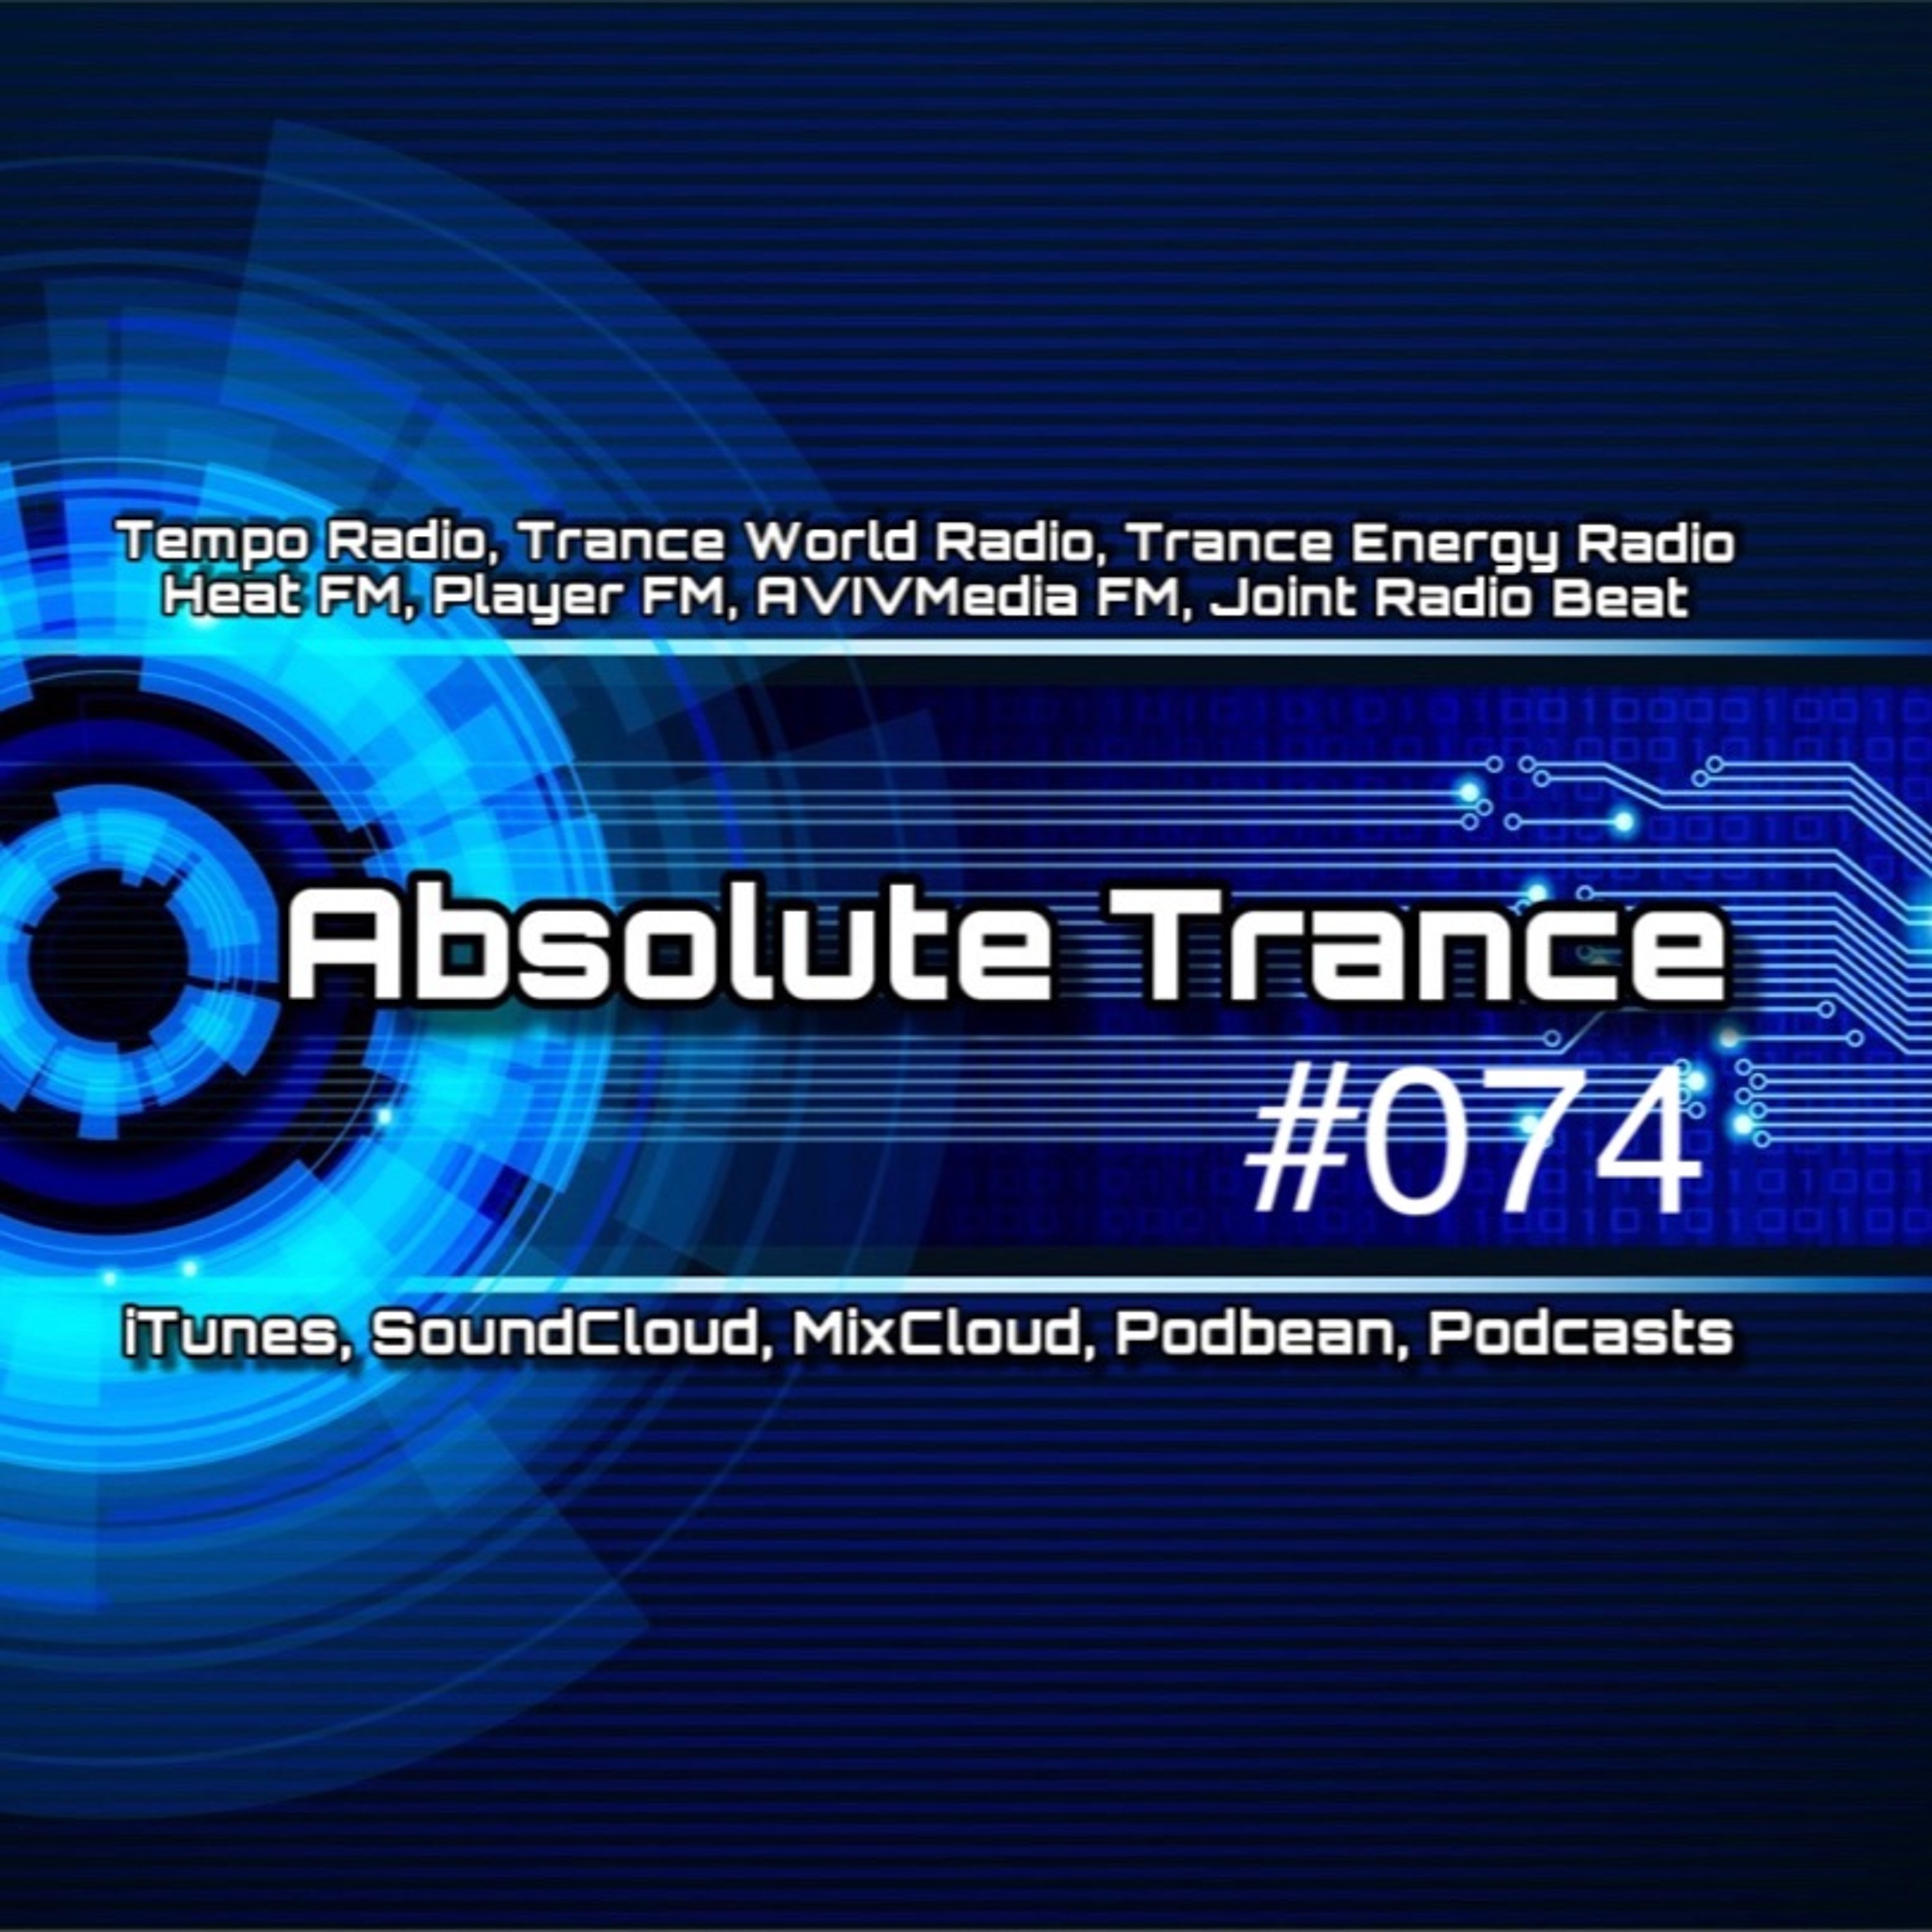 Absolute Trance #074